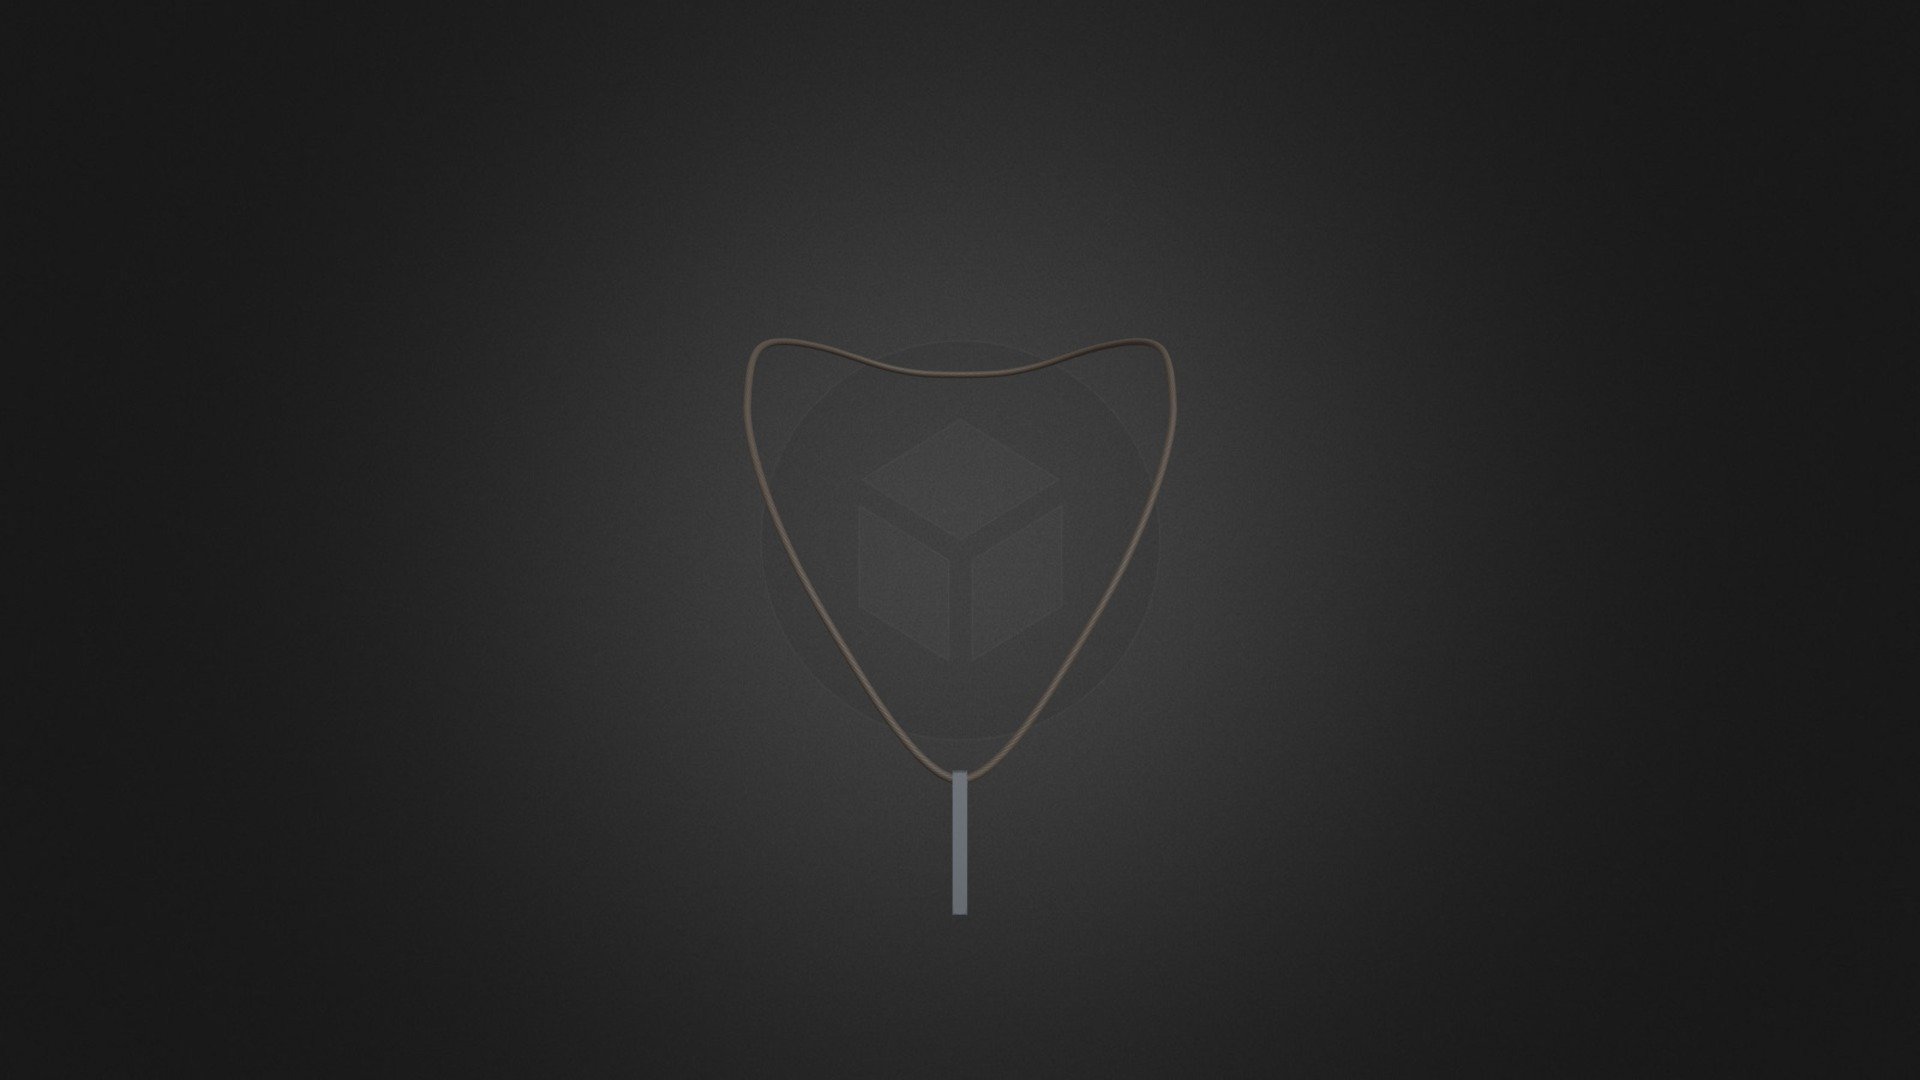 Presenting Vin's Necklace - a captivating blend of artistry and technology now available for you. This mesmerizing FBX mesh, expertly rigged onto the ZinFit Base, is not just an accessory, but an expression of style and individuality.

Unlock the door to this alluring necklace by boosting our Discord server with Nitro. As a token of our gratitude, we're delighted to offer you Vin's Necklace for free, an emblem of appreciation for your support. Watch as this elegantly rigged necklace gracefully enhances your avatar's appearance, reflecting both your taste and your dedication to our community.

Want to get it yourself? Go to either our store page or discord to learn more!

https://discord.gg/virtualthreads - Vin Necklace - 3D model by VirtualThreads 3d model